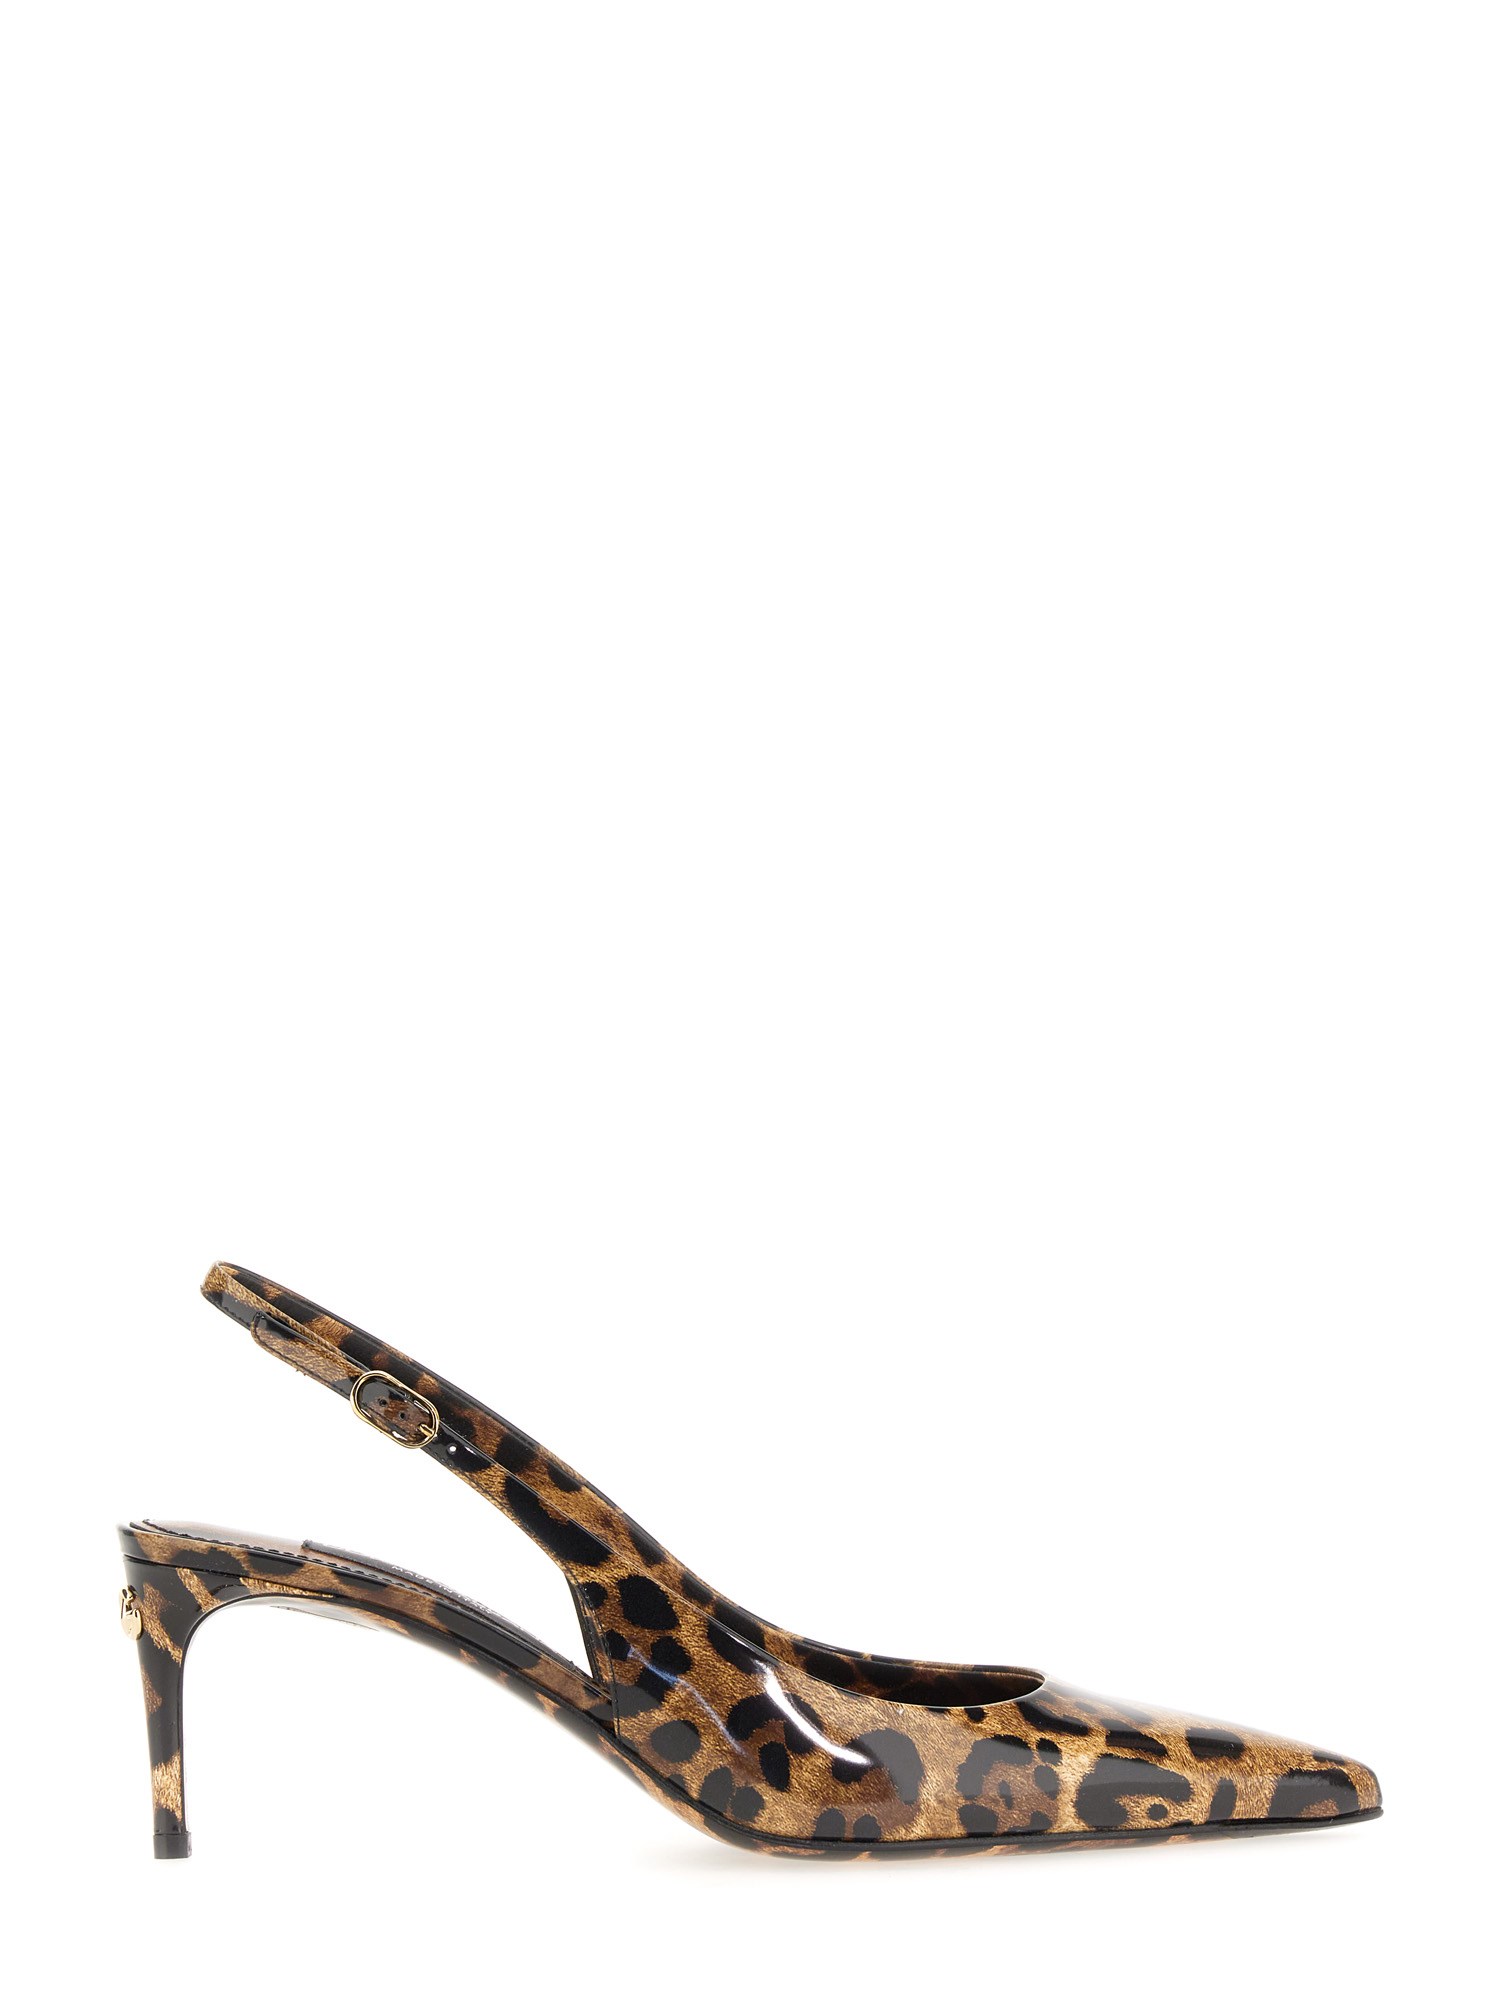 dolce & gabbana sling back with spotted print